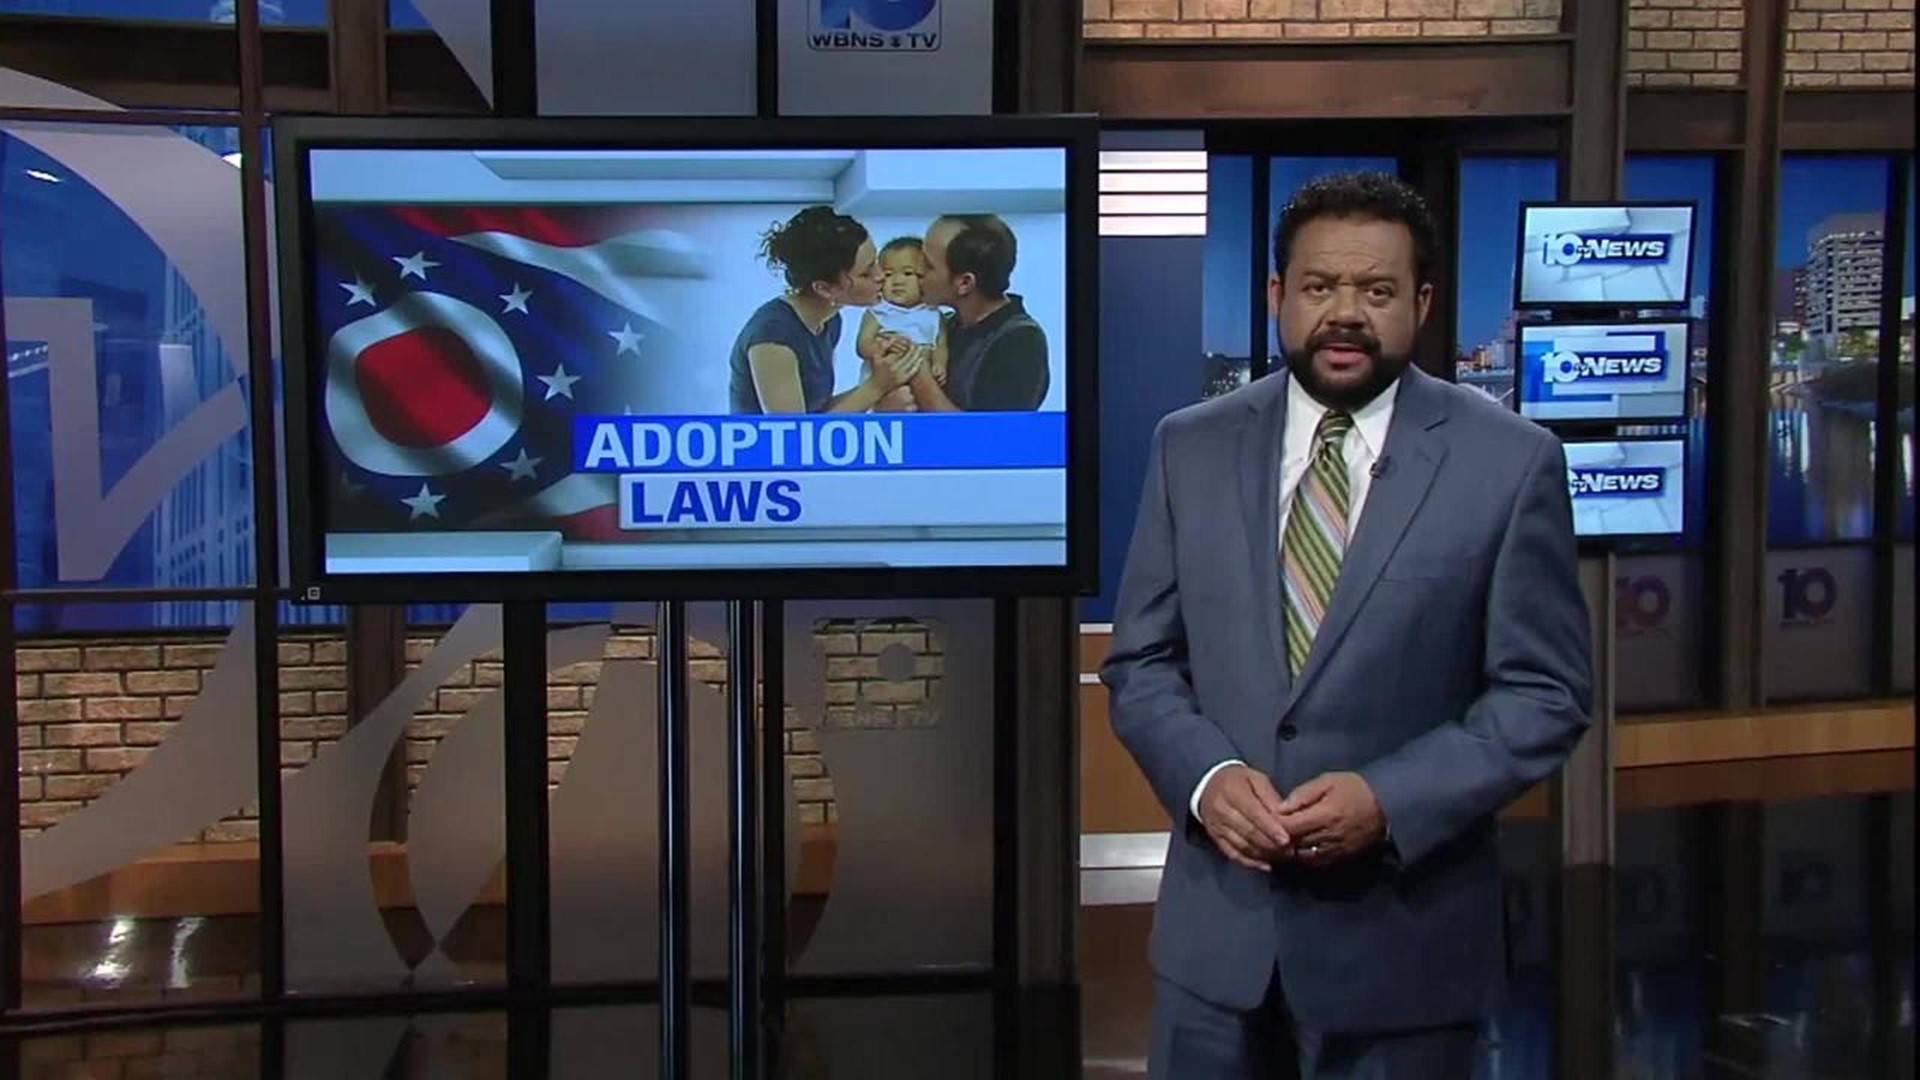 Changes To Adoption Laws Will Allow Couples To Advertise For Children